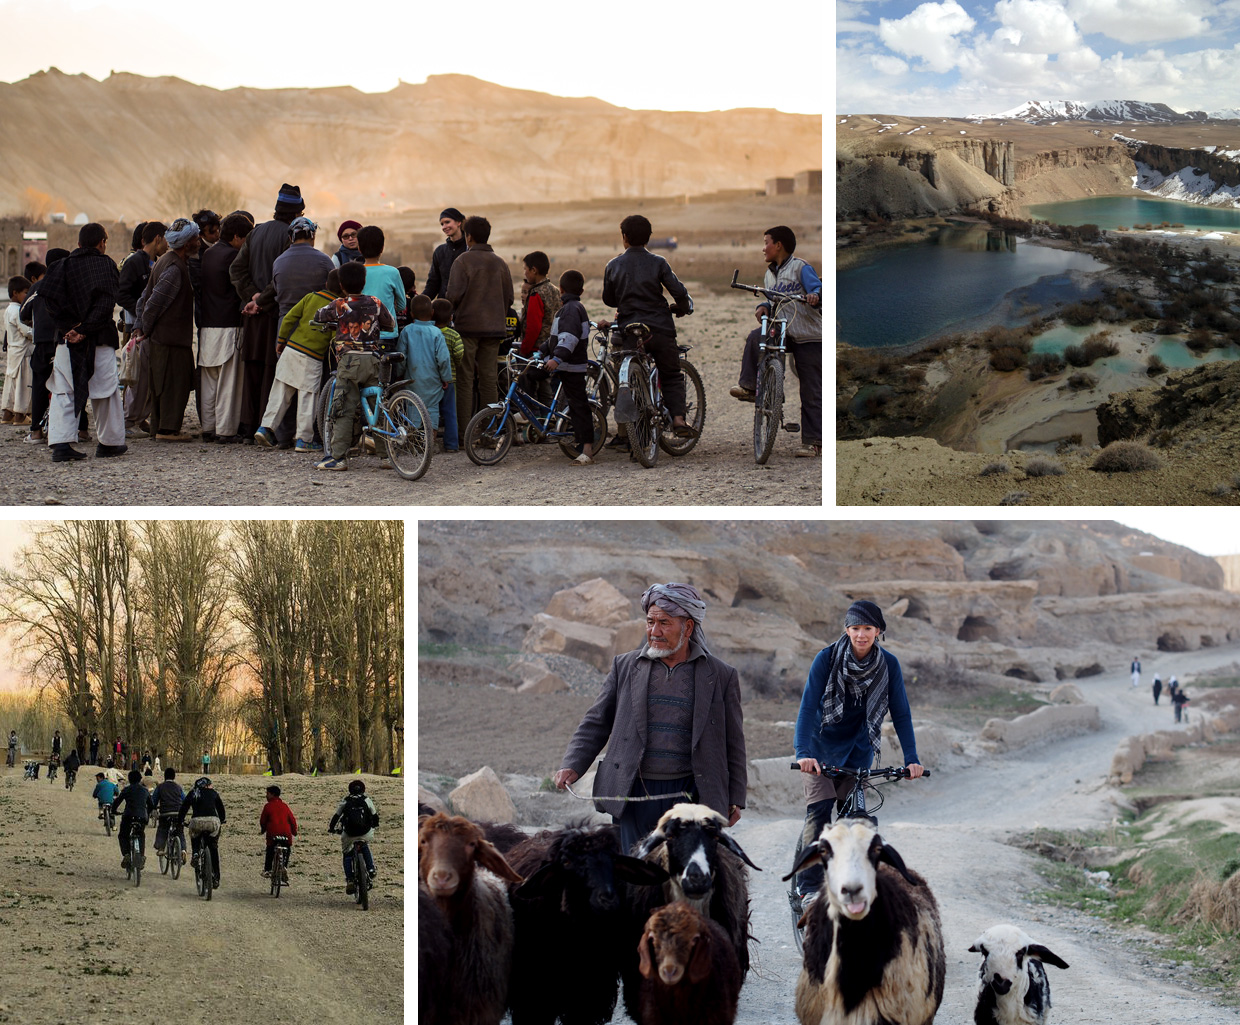 Working with the children of bamiyan